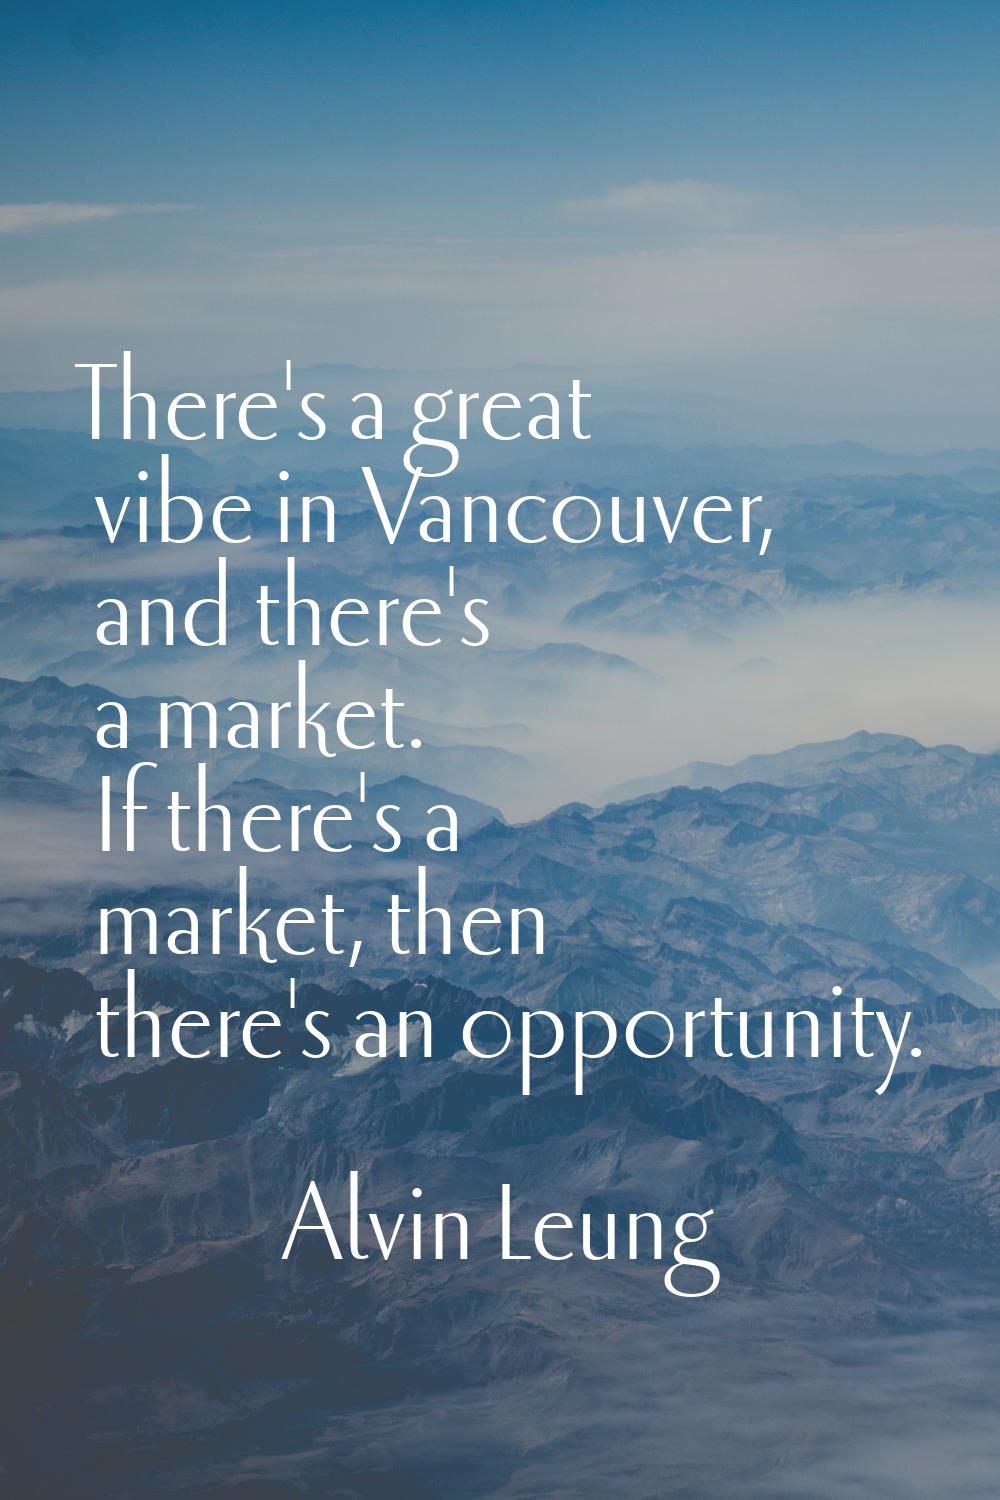 There's a great vibe in Vancouver, and there's a market. If there's a market, then there's an oppor